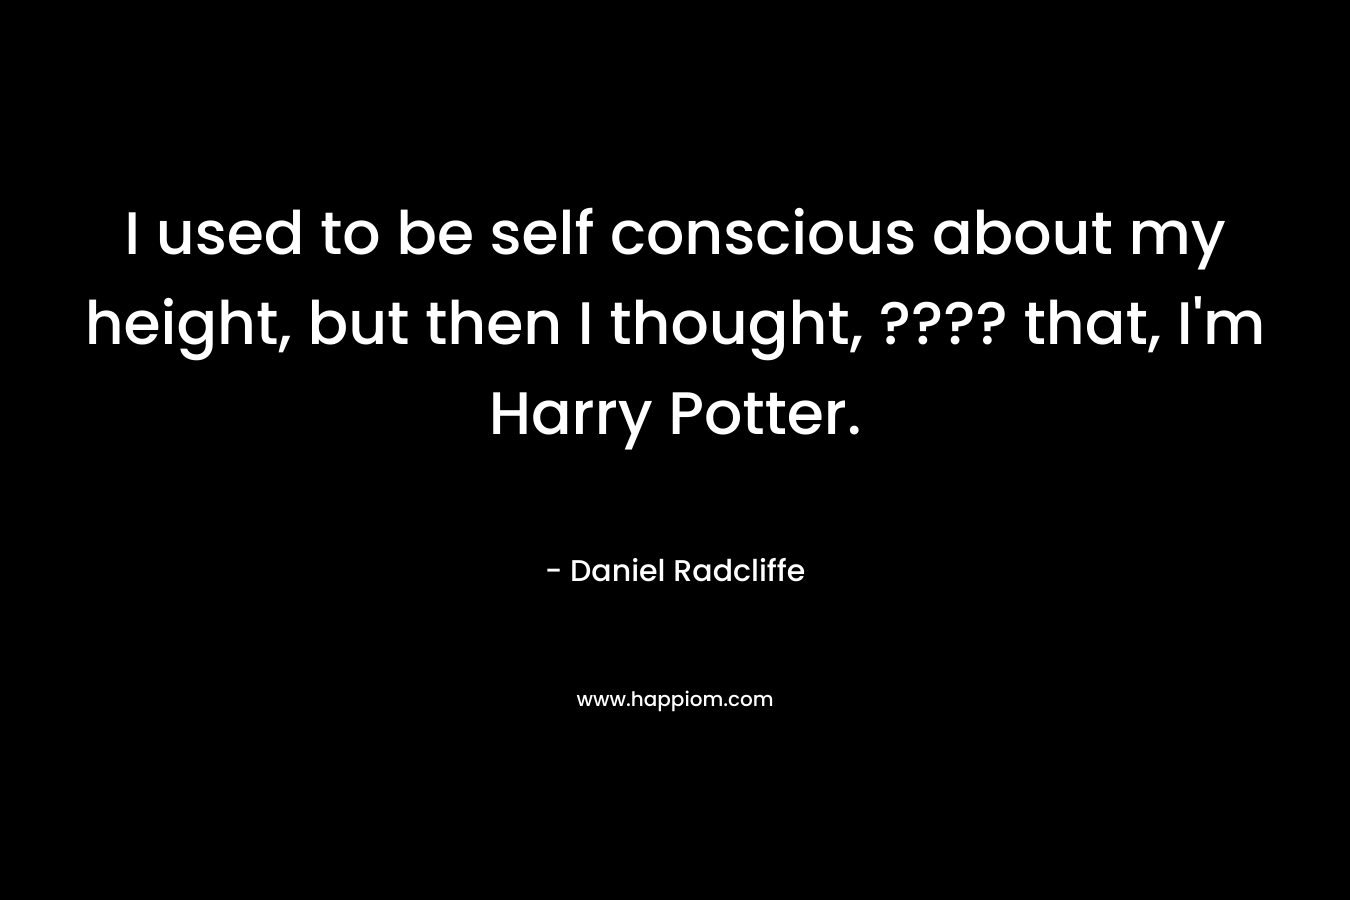 I used to be self conscious about my height, but then I thought, ???? that, I’m Harry Potter. – Daniel Radcliffe